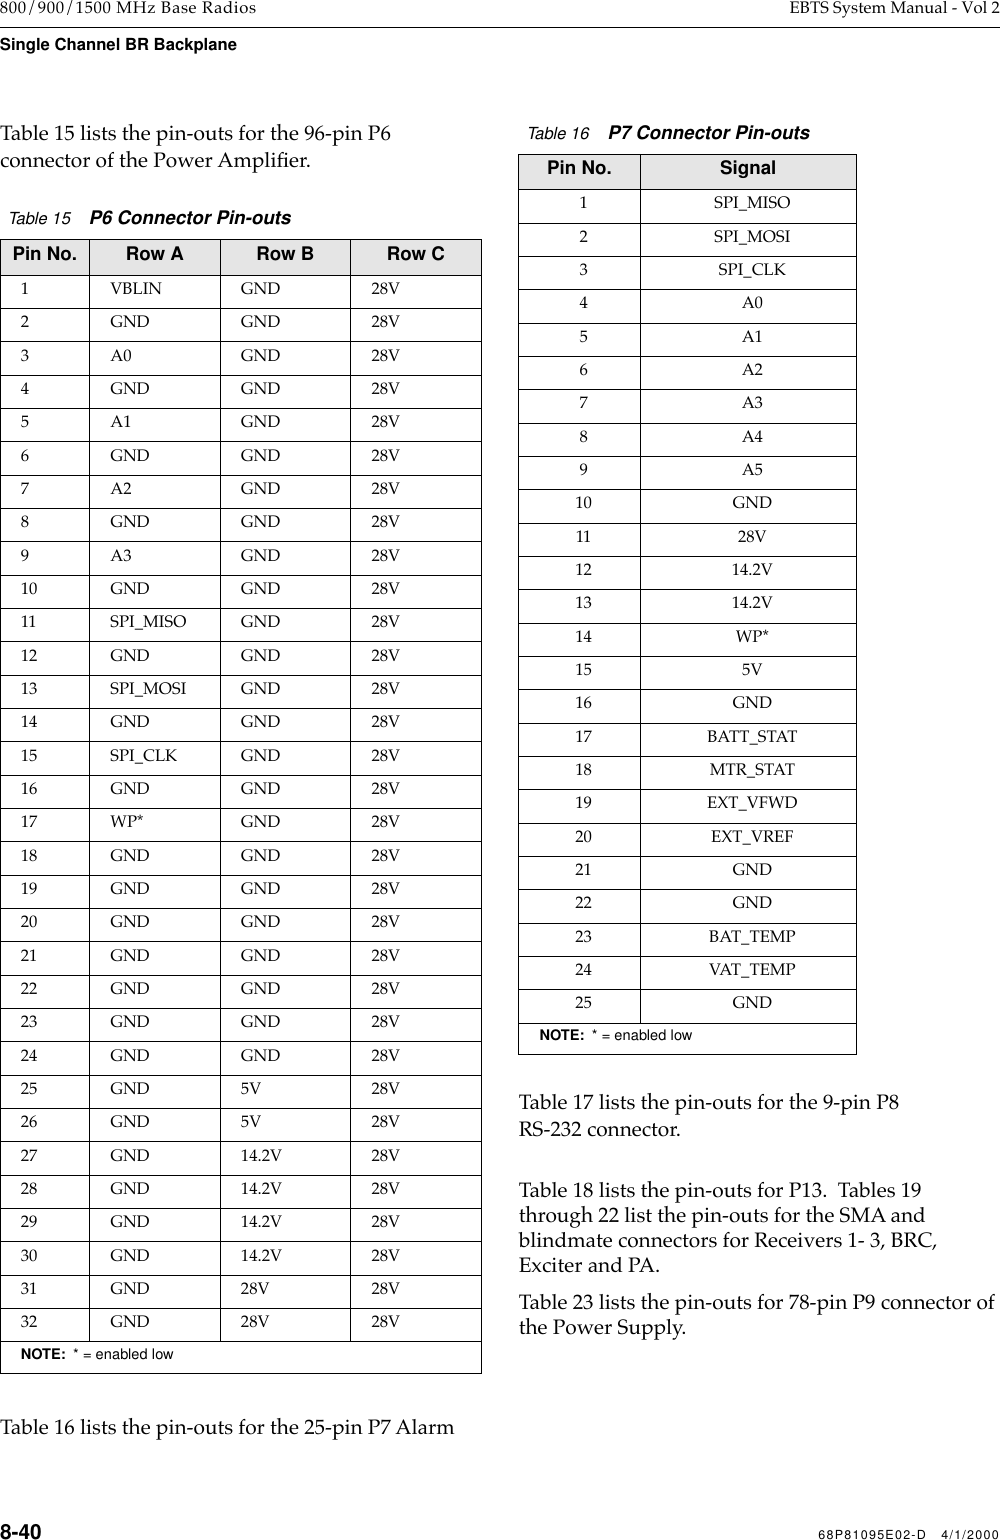 8-40 68P81095E02-D   4/1/2000800/900/1500 MHz Base Radios EBTS System Manual - Vol 2Single Channel BR BackplaneTable 15 lists the pin-outs for the 96-pin P6 connector of the Power AmpliÞer.Table 16 lists the pin-outs for the 25-pin P7 Alarm Table 17 lists the pin-outs for the 9-pin P8 RS-232 connector.Table 18 lists the pin-outs for P13.  Tables 19 through 22 list the pin-outs for the SMA and blindmate connectors for Receivers 1- 3, BRC, Exciter and PA.    Table 23 lists the pin-outs for 78-pin P9 connector of the Power Supply.Table 15    P6 Connector Pin-outsPin No. Row A Row B Row C1 VBLIN GND 28V2 GND GND 28V3 A0 GND 28V4 GND GND 28V5 A1 GND 28V6 GND GND 28V7 A2 GND 28V8 GND GND 28V9 A3 GND 28V10 GND GND 28V11 SPI_MISO GND 28V12 GND GND 28V13 SPI_MOSI GND 28V14 GND GND 28V15 SPI_CLK GND 28V16 GND GND 28V17 WP* GND 28V18 GND GND 28V19 GND GND 28V20 GND GND 28V21 GND GND 28V22 GND GND 28V23 GND GND 28V24 GND GND 28V25 GND 5V 28V26 GND 5V 28V27 GND 14.2V 28V28 GND 14.2V 28V29 GND 14.2V 28V30 GND 14.2V 28V31 GND 28V 28V32 GND 28V 28VNOTE:  * = enabled lowTable 16    P7 Connector Pin-outsPin No. Signal1 SPI_MISO2 SPI_MOSI3 SPI_CLK4A05A16A27A38A49A510 GND11 28V12 14.2V13 14.2V14 WP*15 5V16 GND17 BATT_STAT18 MTR_STAT19 EXT_VFWD20 EXT_VREF21 GND22 GND23 BAT_TEMP24 VAT_TEMP25 GNDNOTE:  * = enabled low